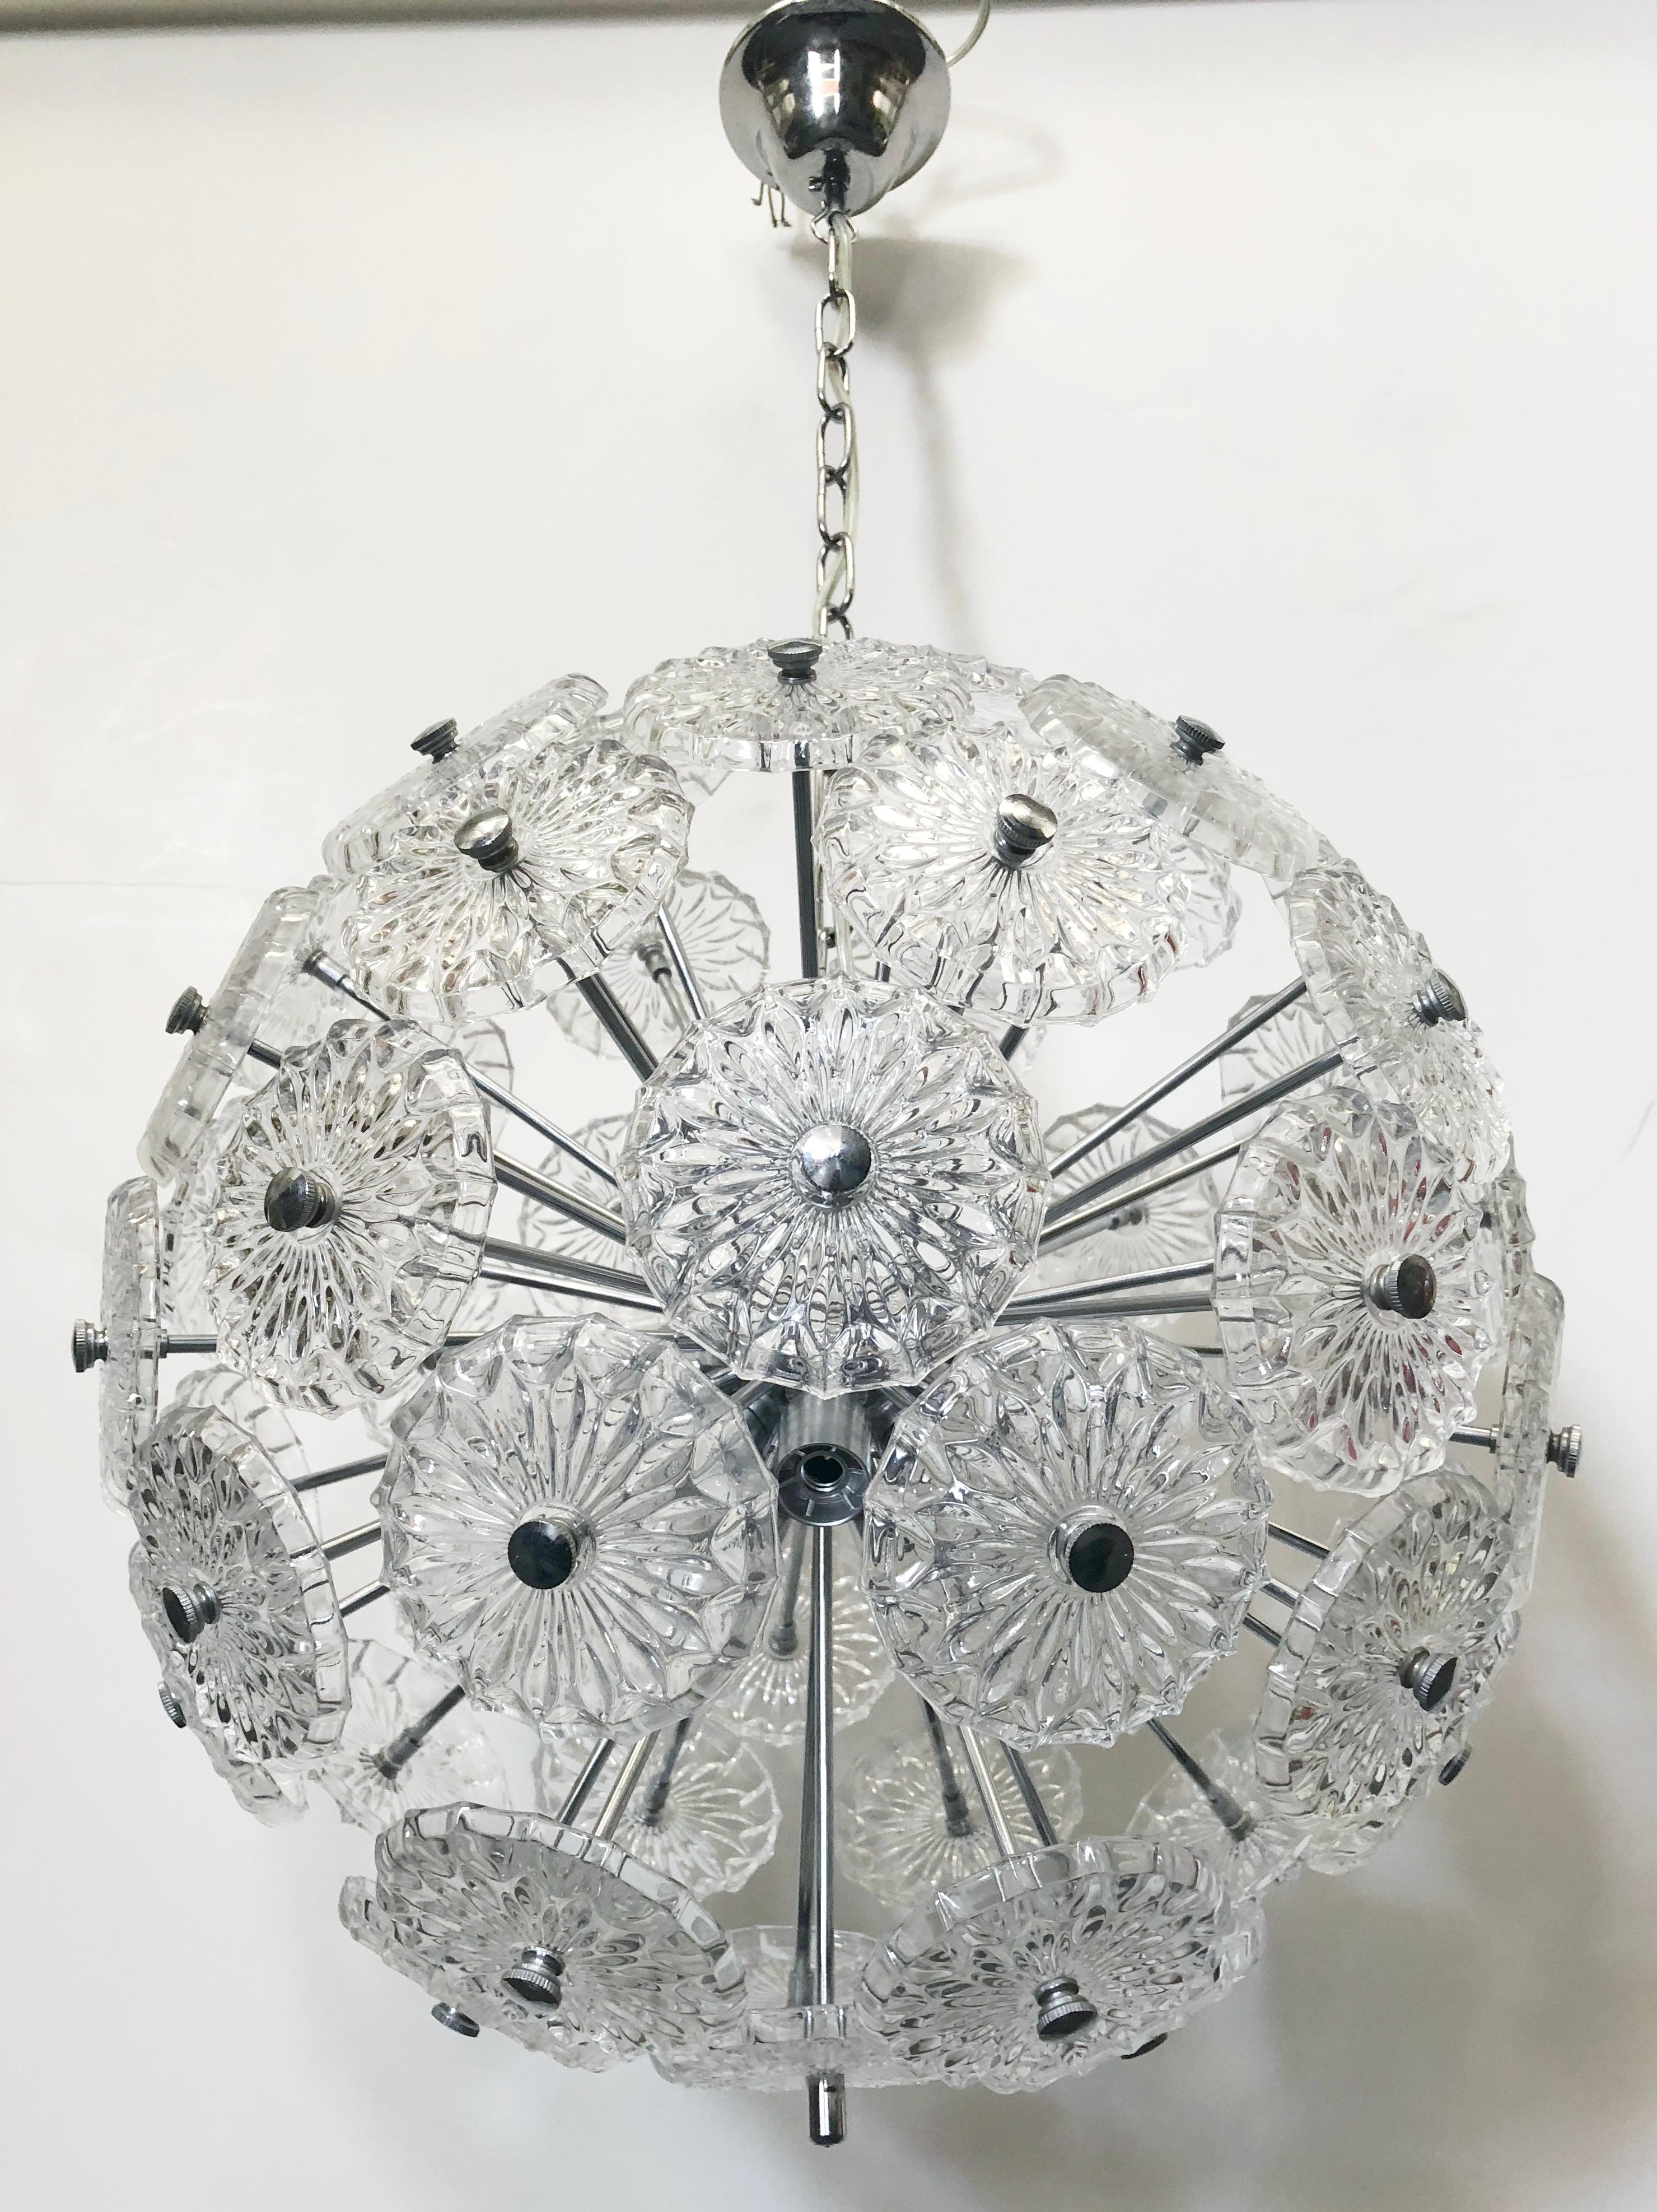 Vintage Italian Sputnik chandelier with clear etched glasses detailed and textured with geometric designs, mounted on chrome frame / Made in Italy circa 1960's
10 lights / E12 or E14 type / max 40W each
Diameter: 16 inches / Total Height: 33 inches